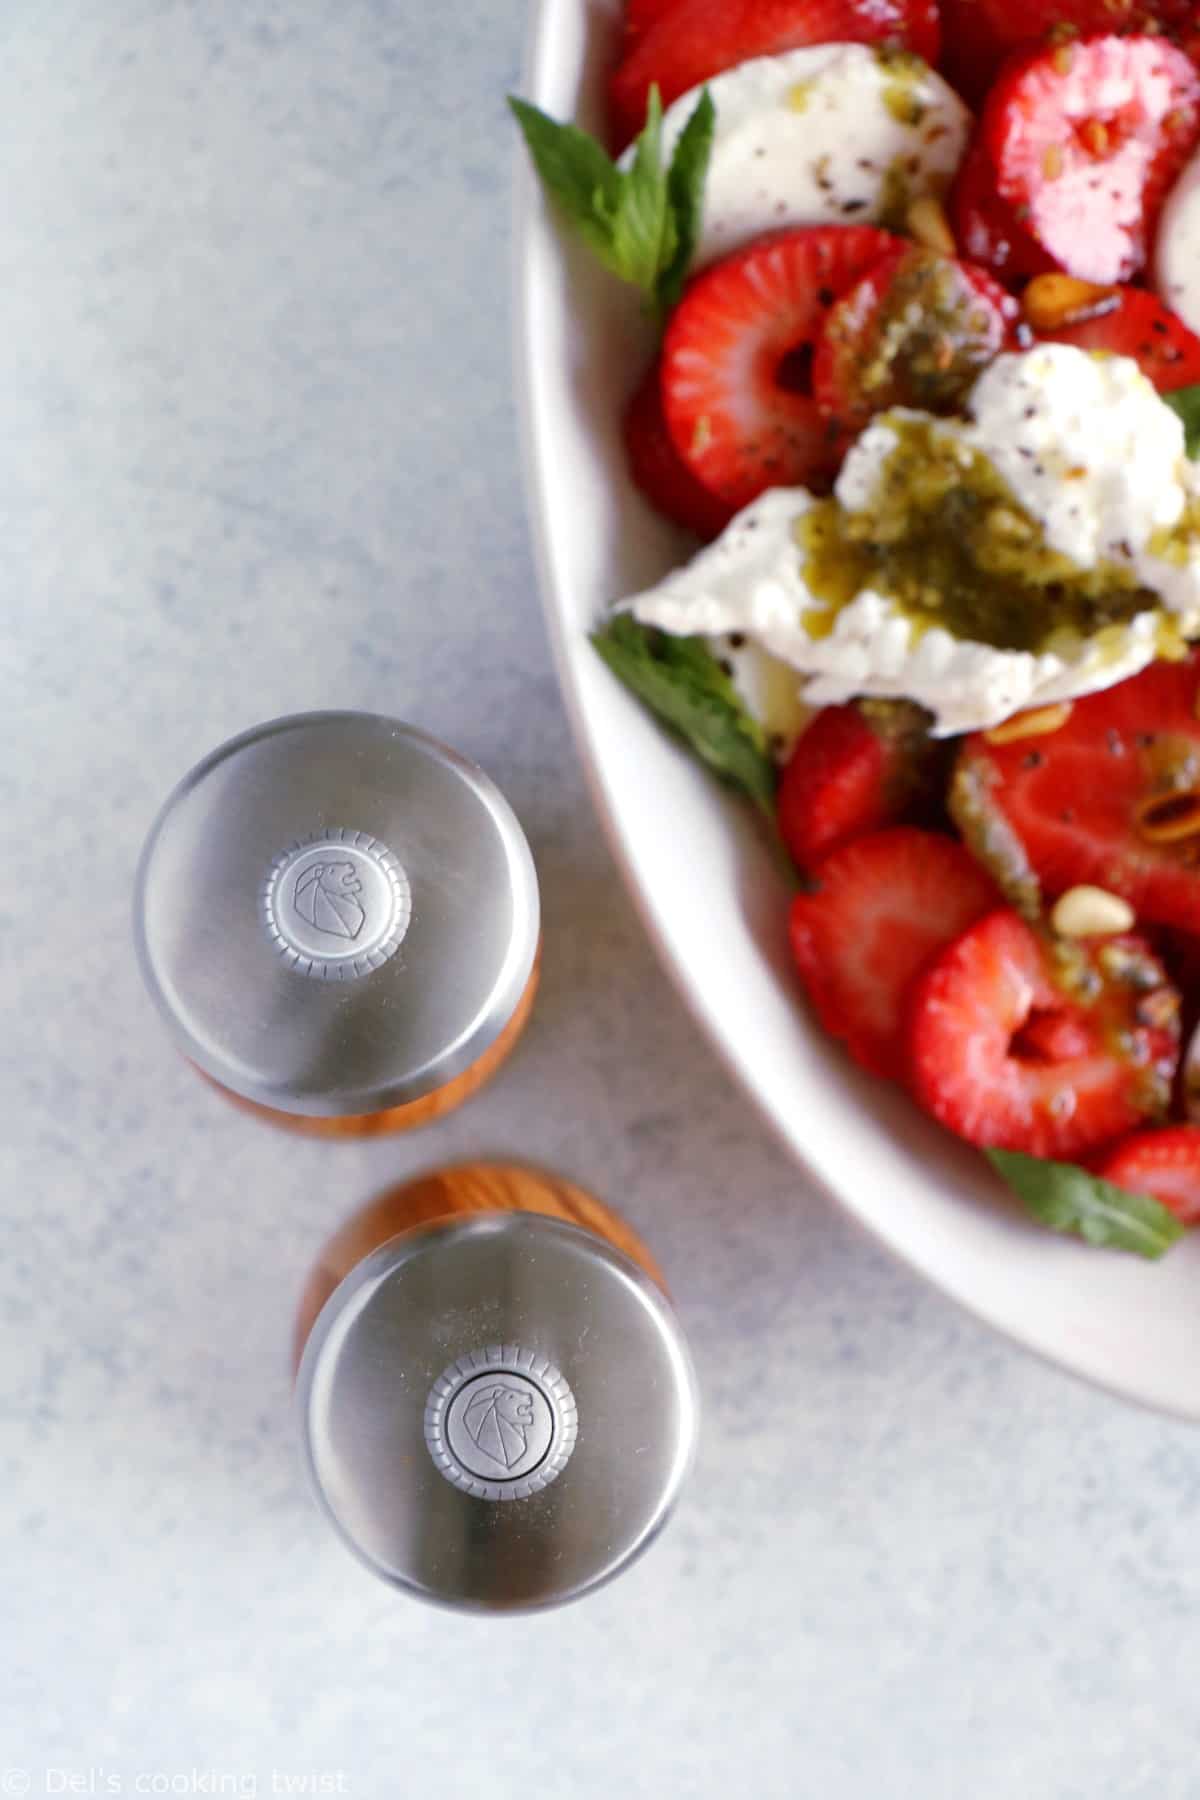 Strawberry Burrata Salad with Mint Pesto. This simple strawberry burrata salad with a mint pesto is full of summer goodness. It is loaded with refreshing flavors with juicy, creamy and crunchy textures. The salad is also naturally gluten-free and ready in no time!